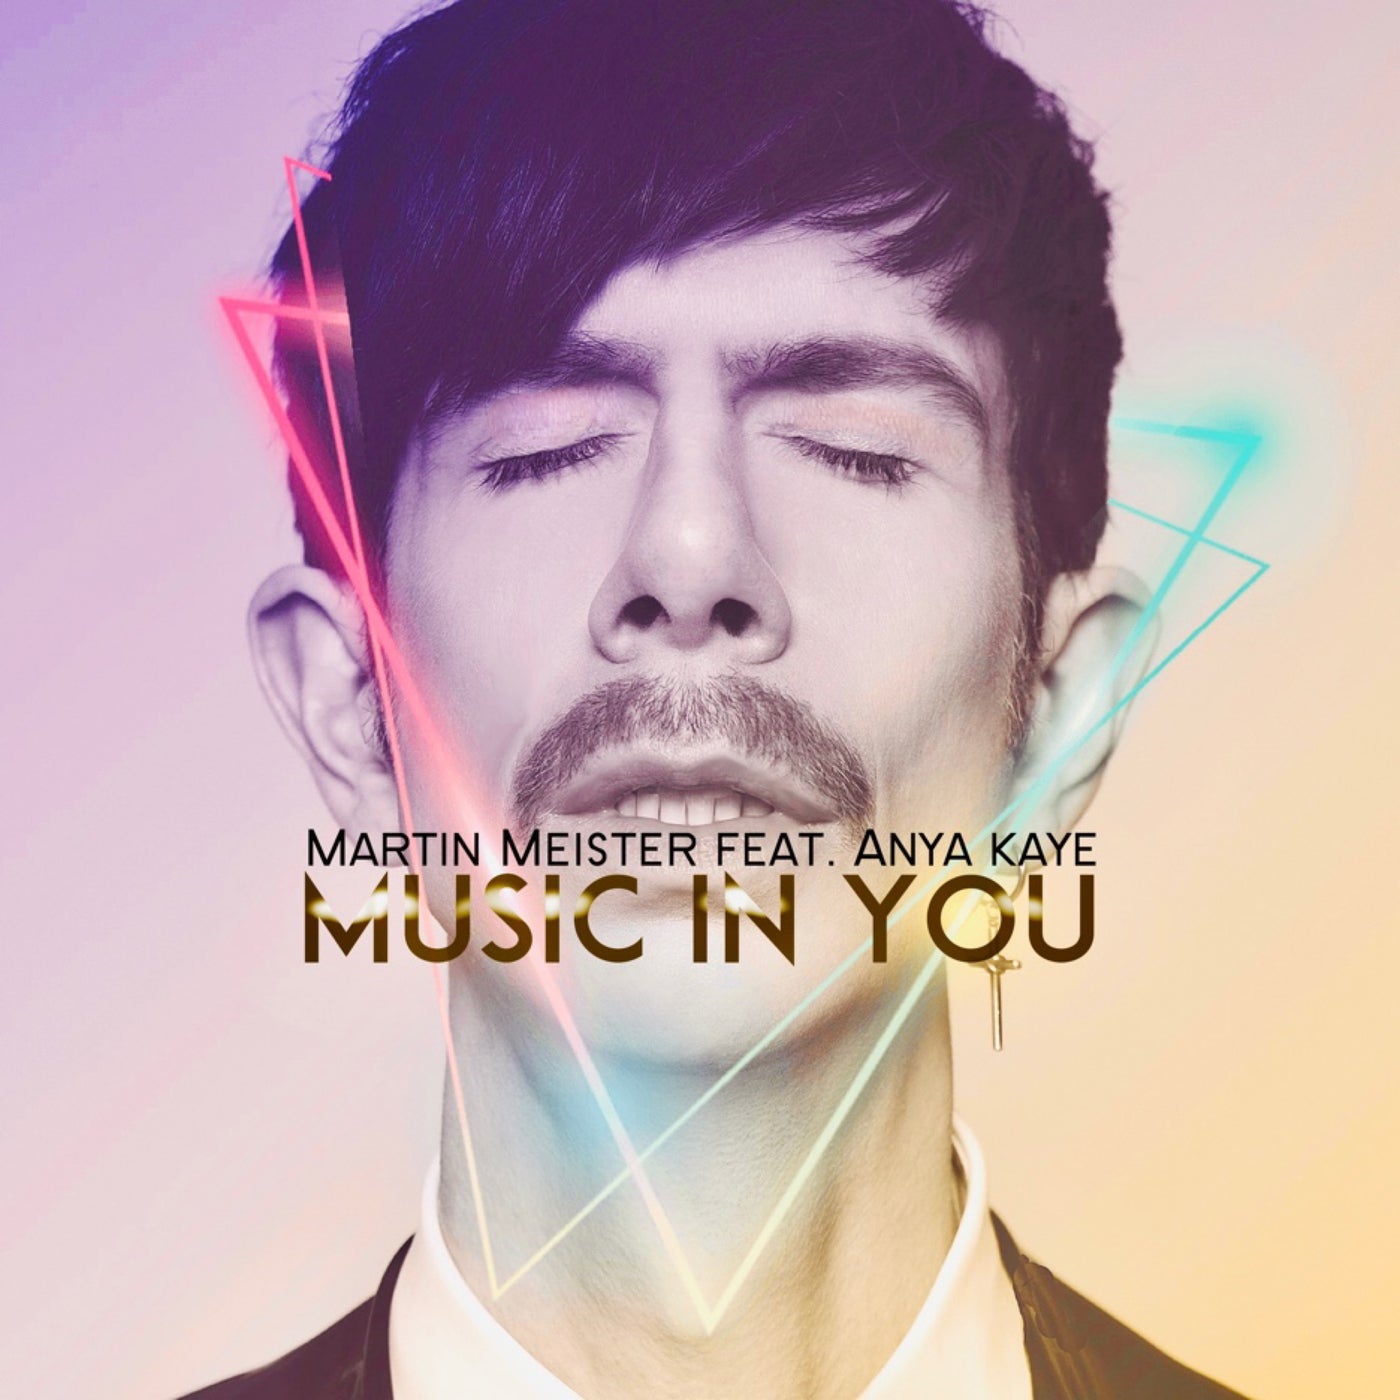 Music in You